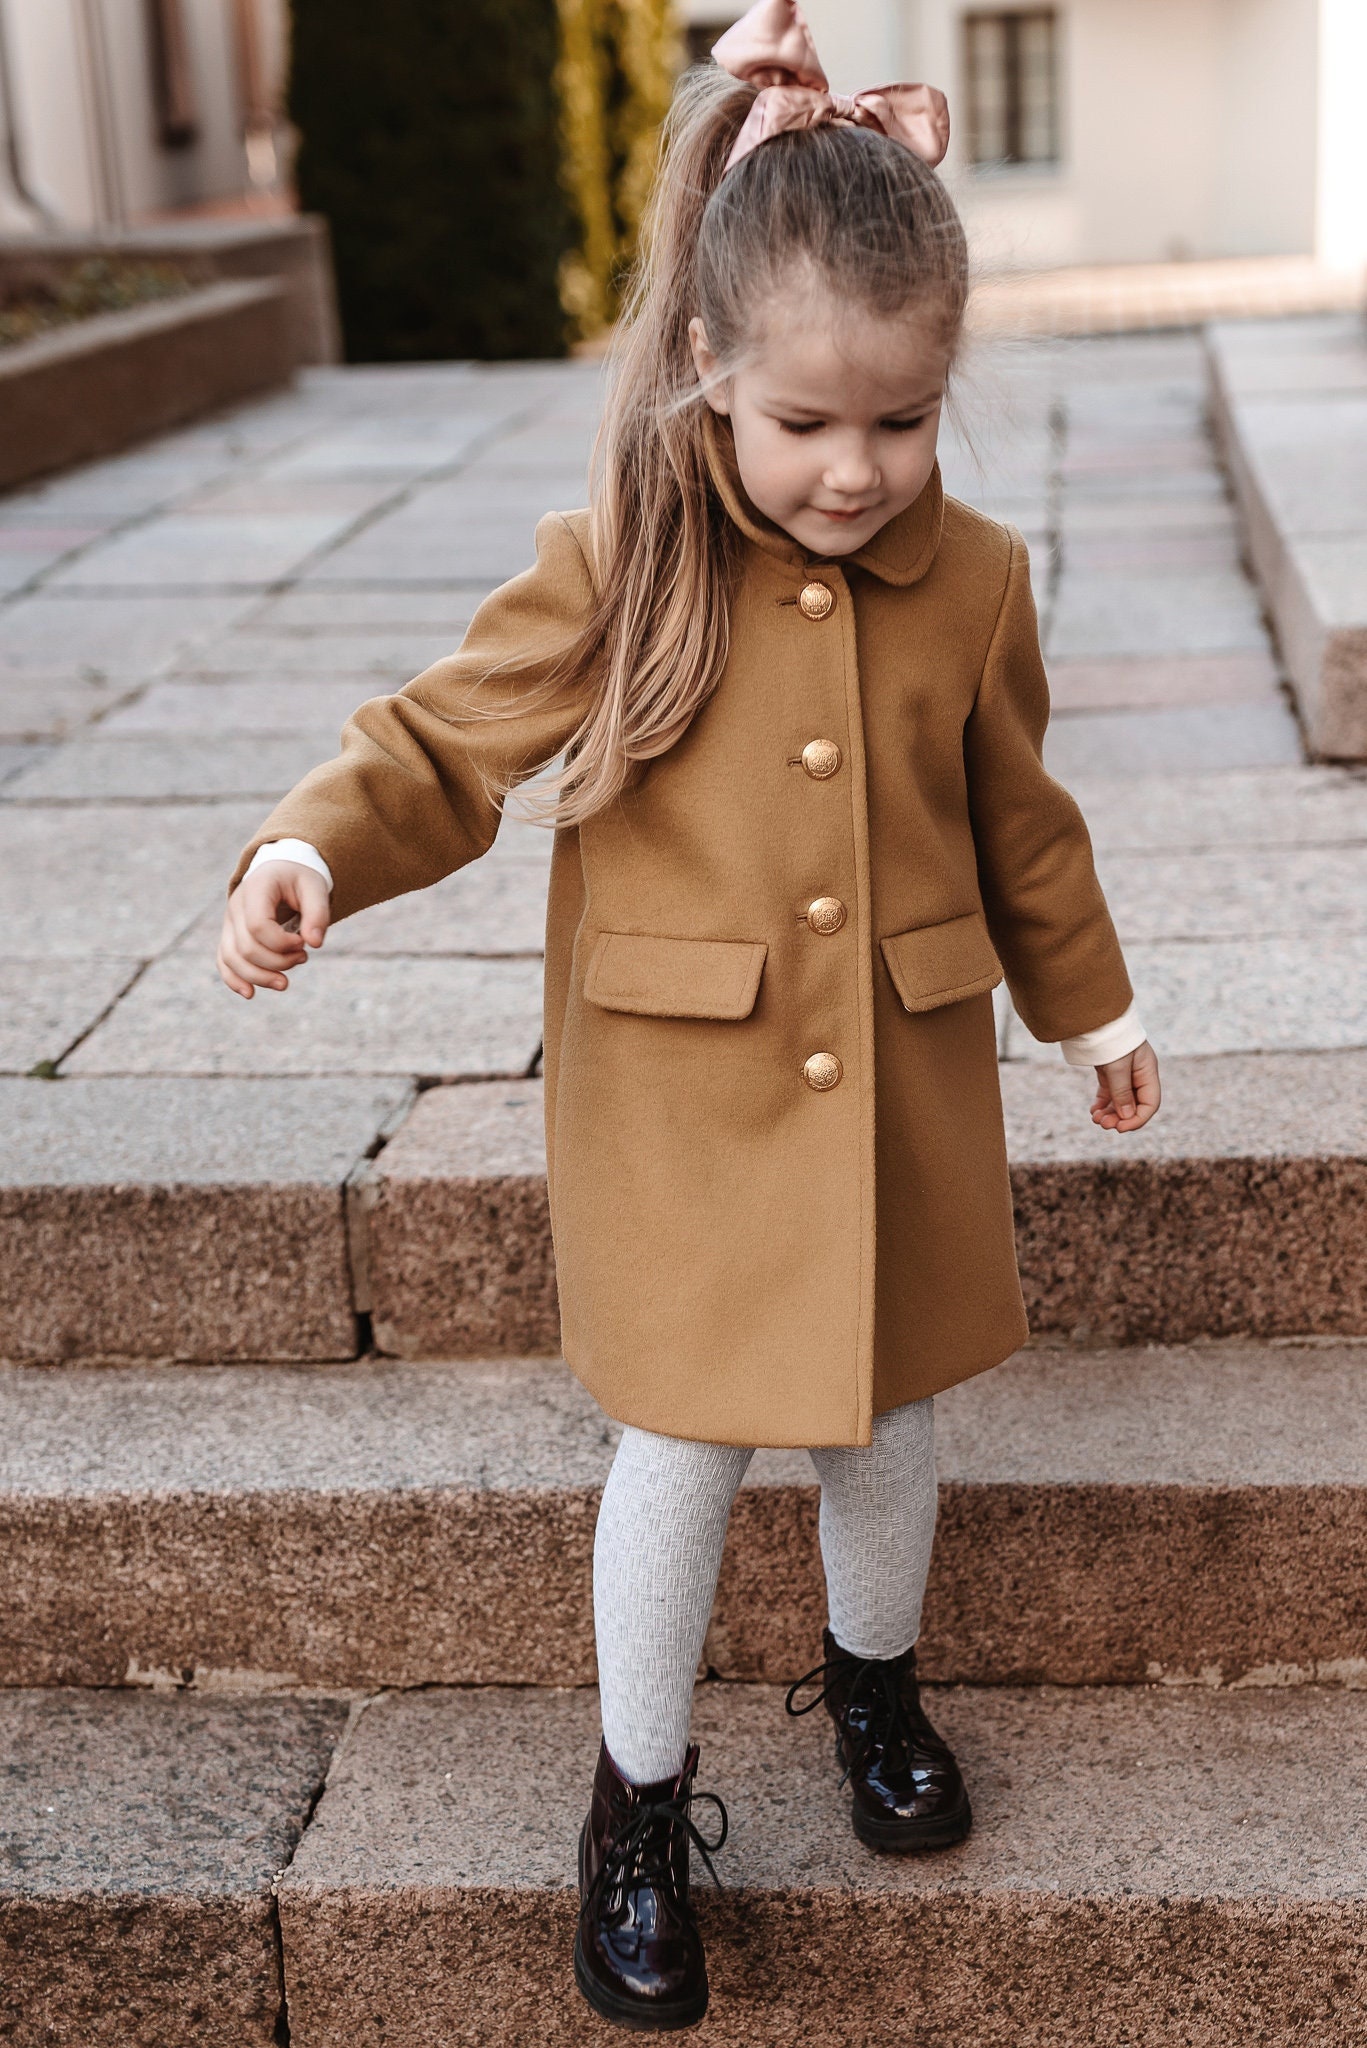 Long Sleeve Girl's Jacket, Golden Buttons Fastening, Classic Style Autumn  Wear for Toddler Girl, Suitable for EU Size 92 